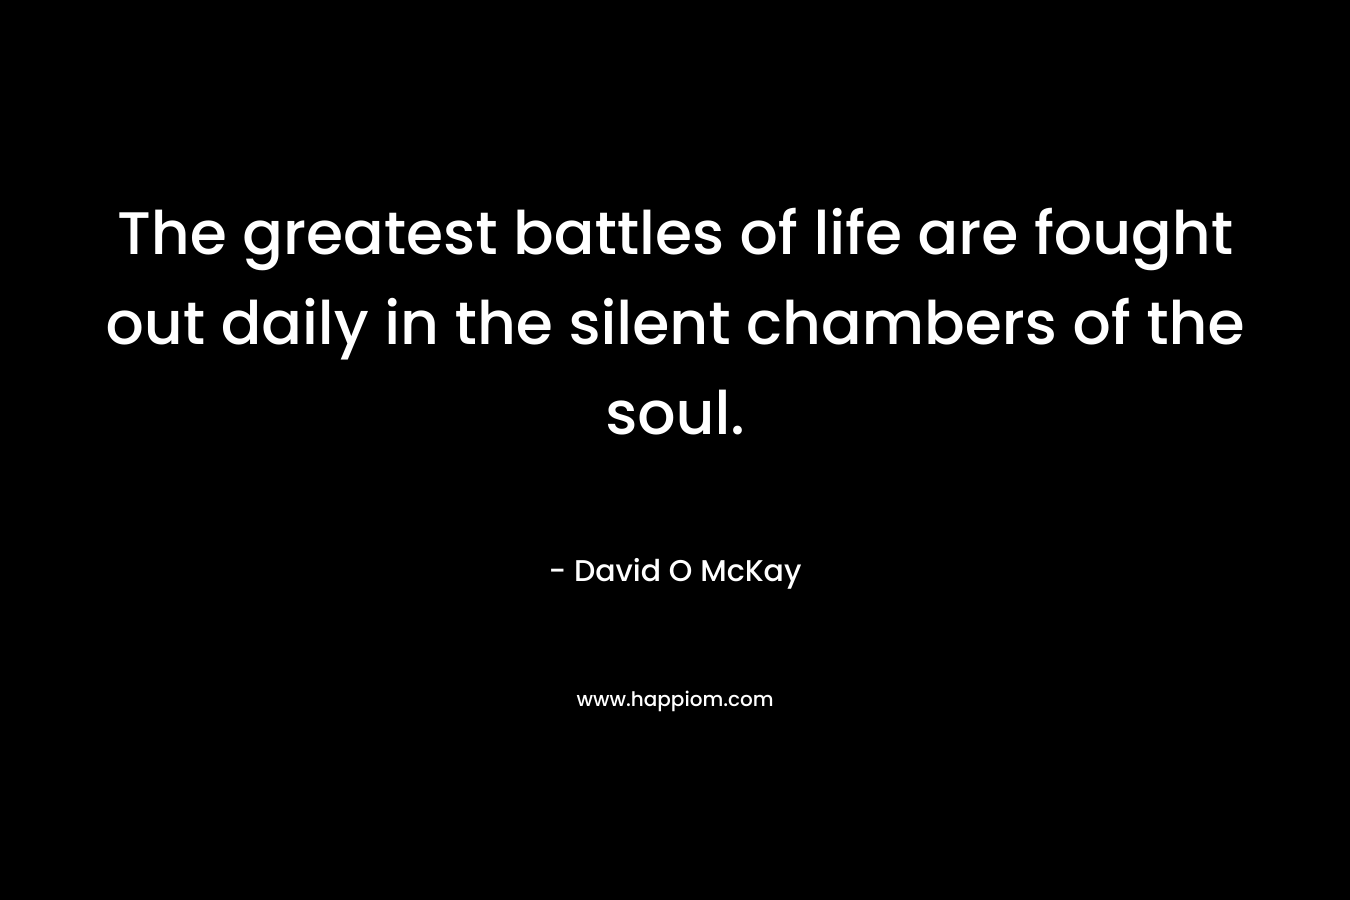 The greatest battles of life are fought out daily in the silent chambers of the soul. – David O McKay